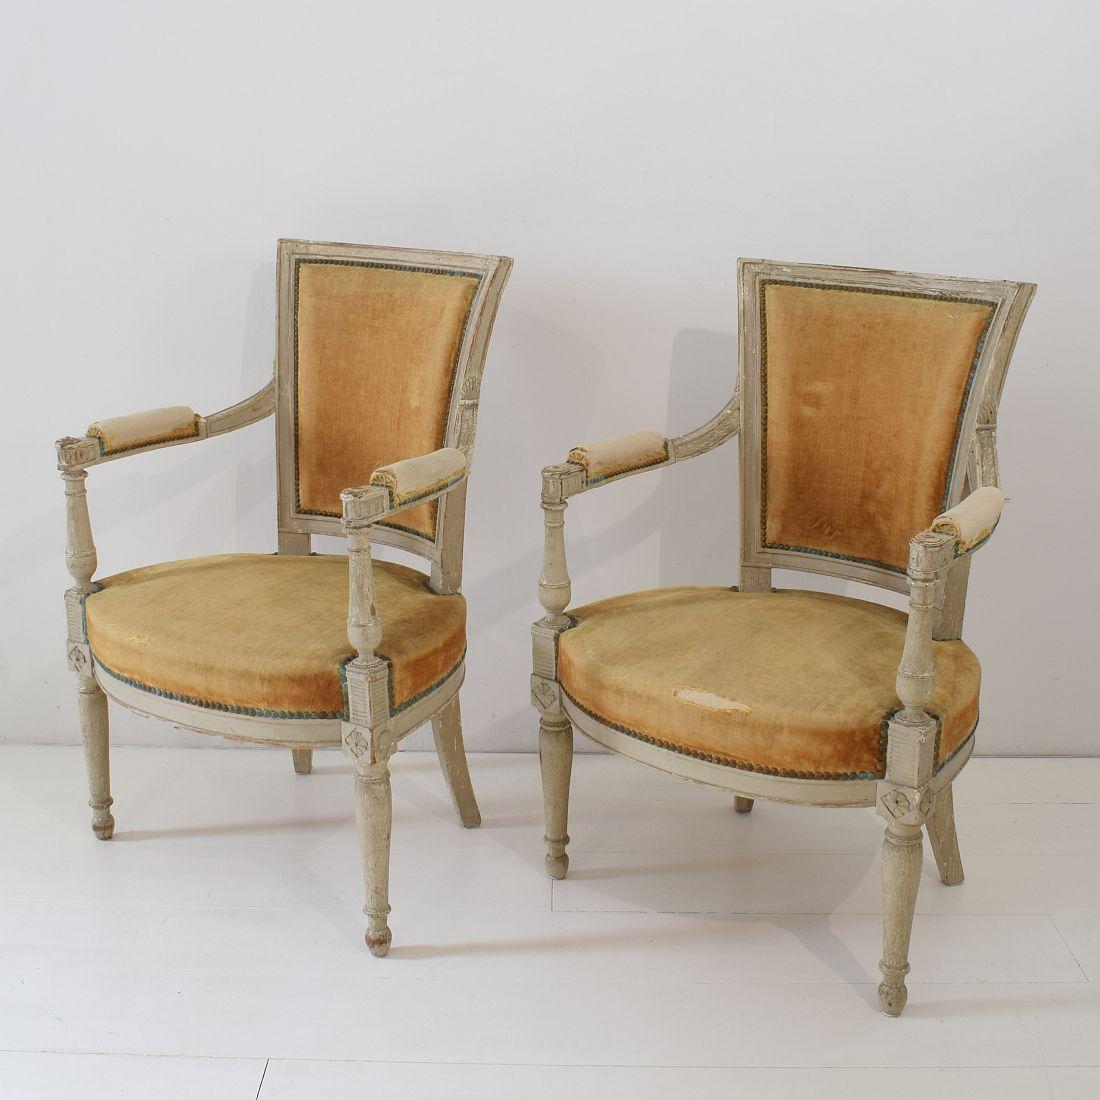 Beautiful pair of Directoire chairs, France, late 18th century. At this moment still upholstered with yellow velvet that needs to be replaced. Seat height is 42 cm. Weathered, small losses and old repairs. Despite of their high age, the chairs are